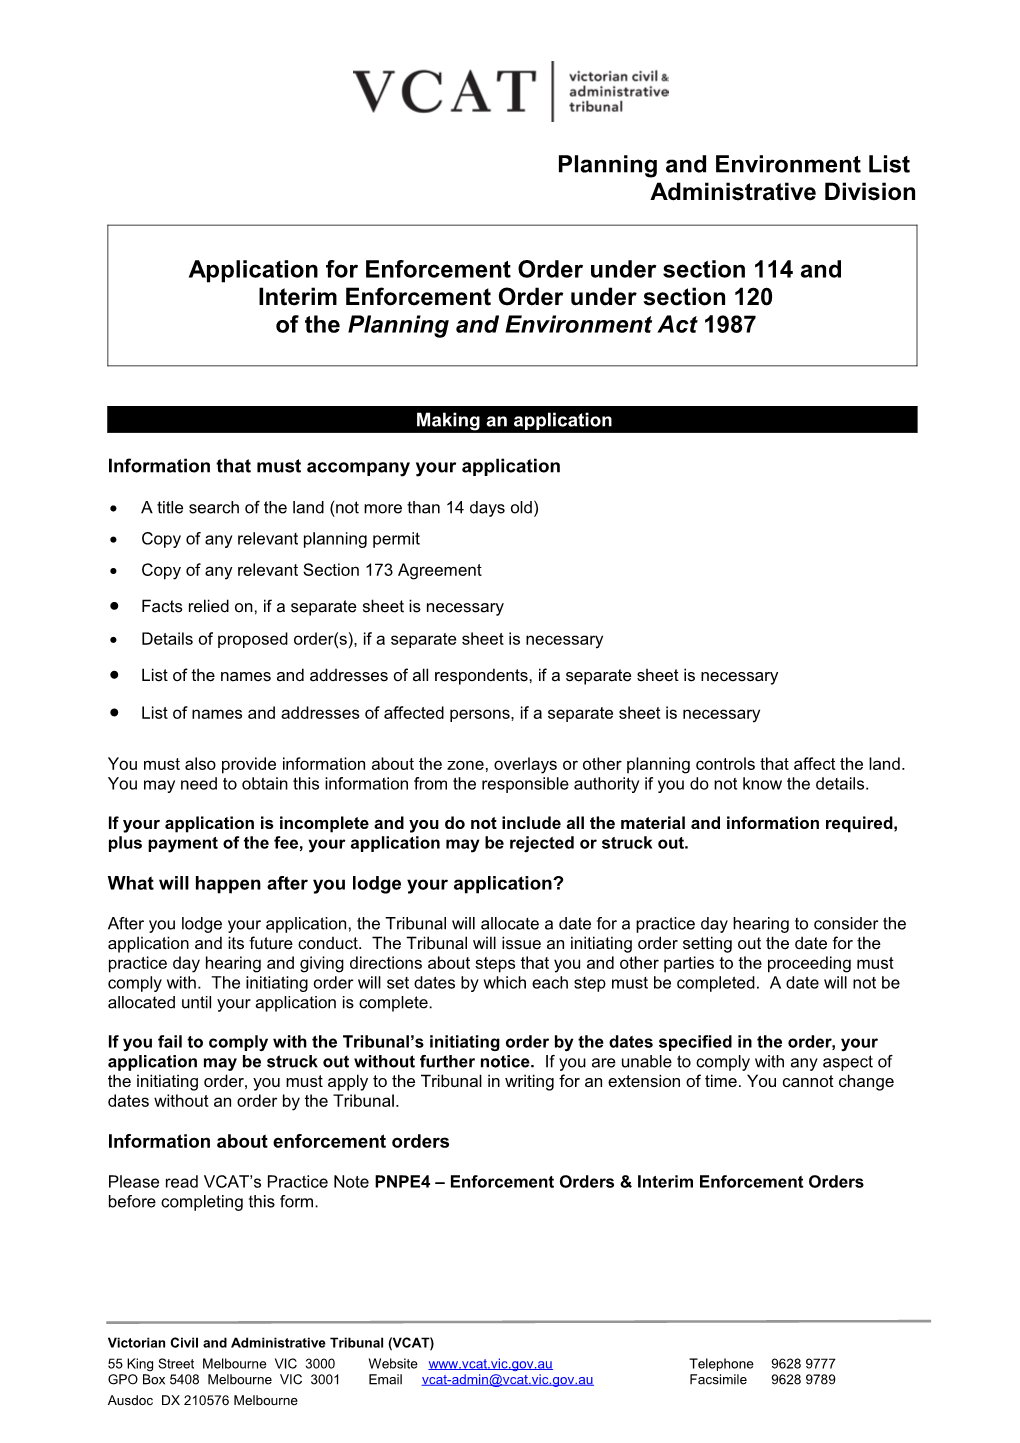 Application for Enforcement Order Under Section 114 And